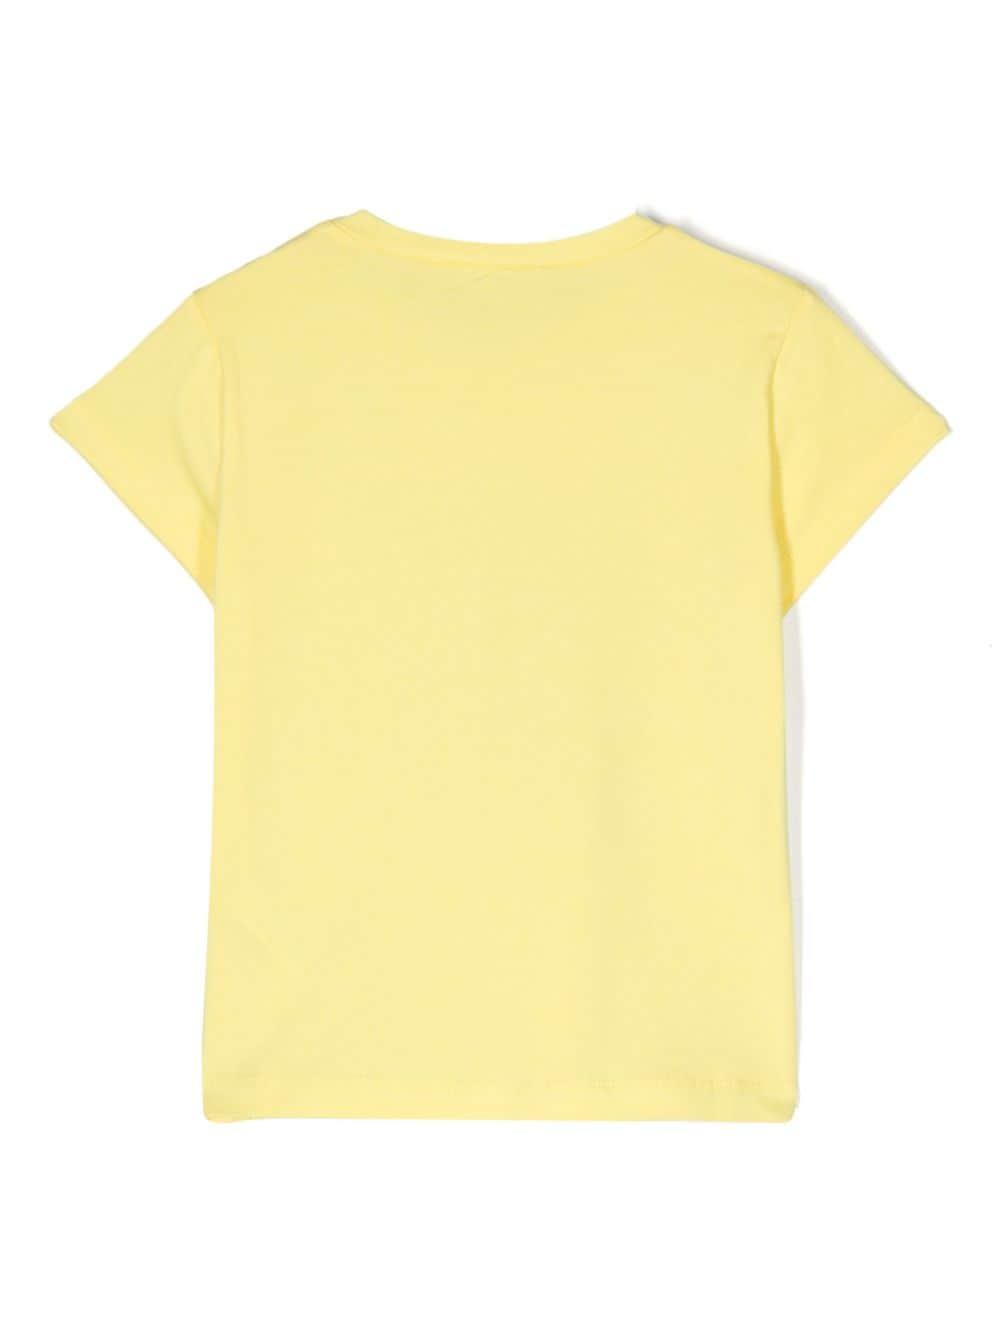 Yellow t-shirt for girls with print